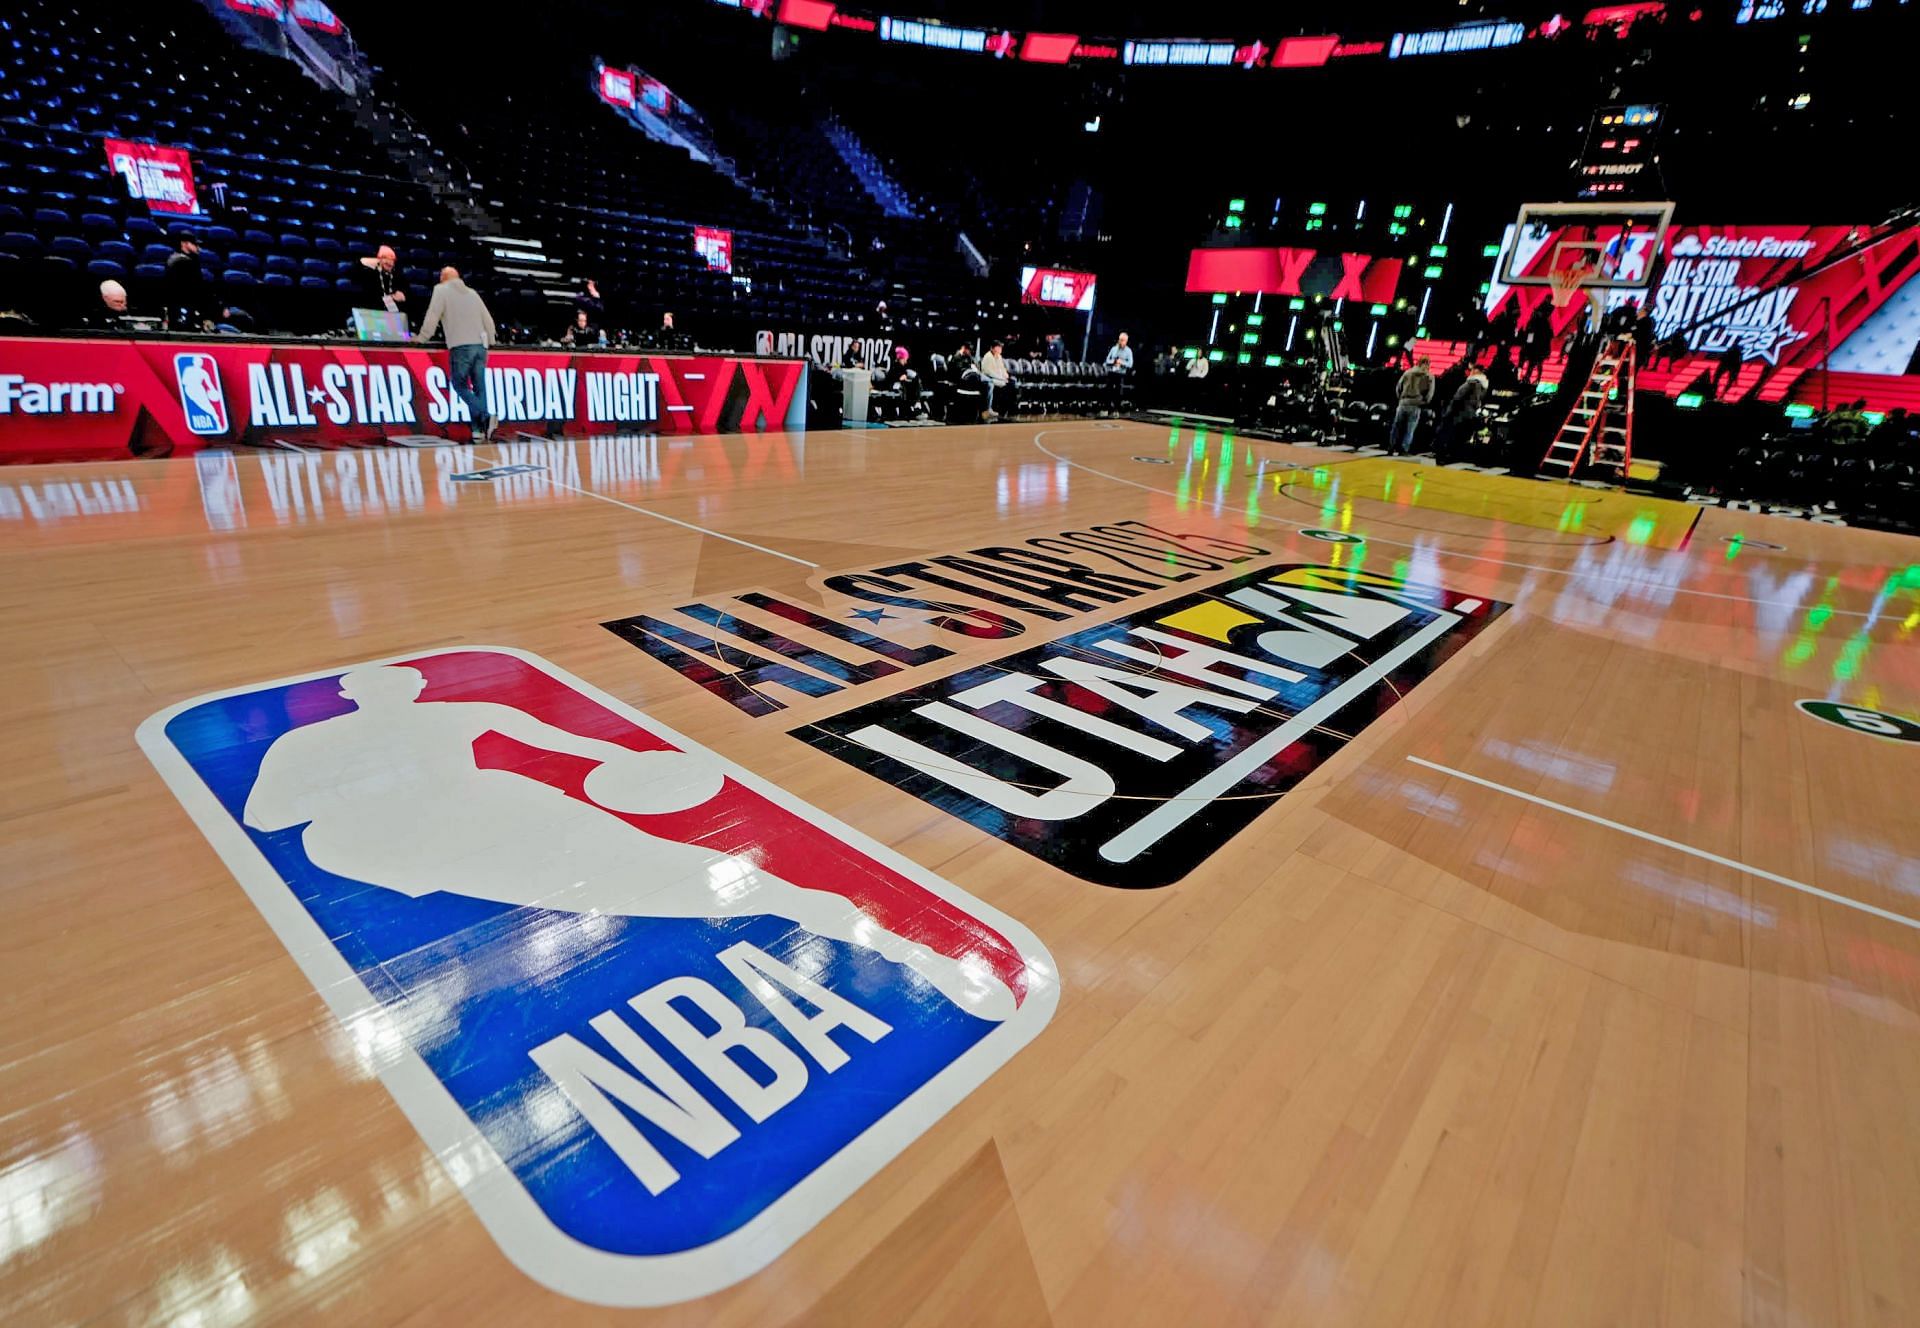 NBA All-Star Game tickets scam sees Lehi woman lose $1,000: All